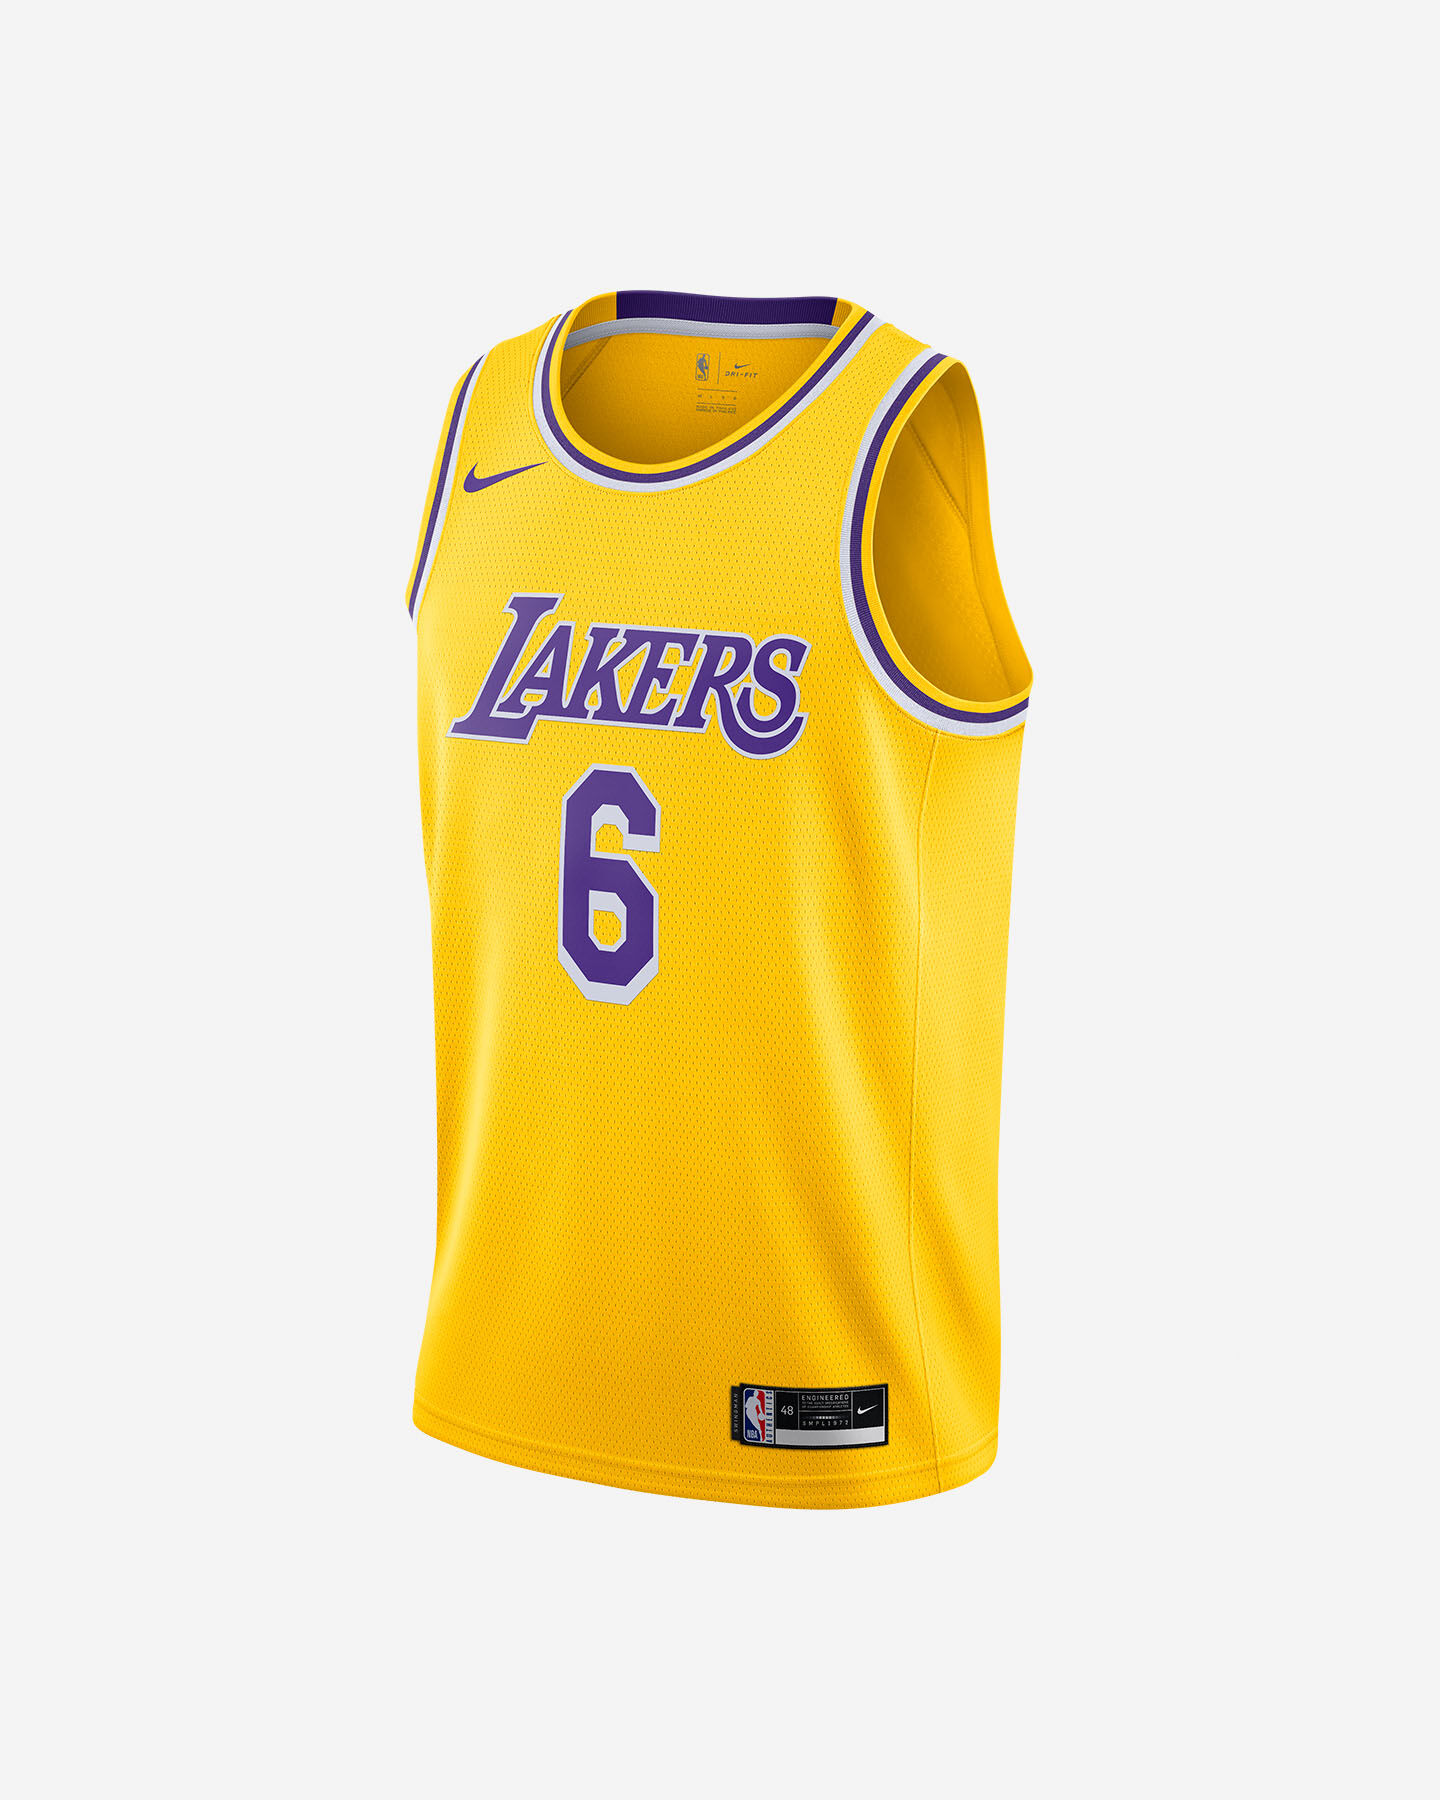  Canotta basket NIKE NBA LOS ANGELES LAKERS LEBRON JAMES M S5349695|738|S scatto 0